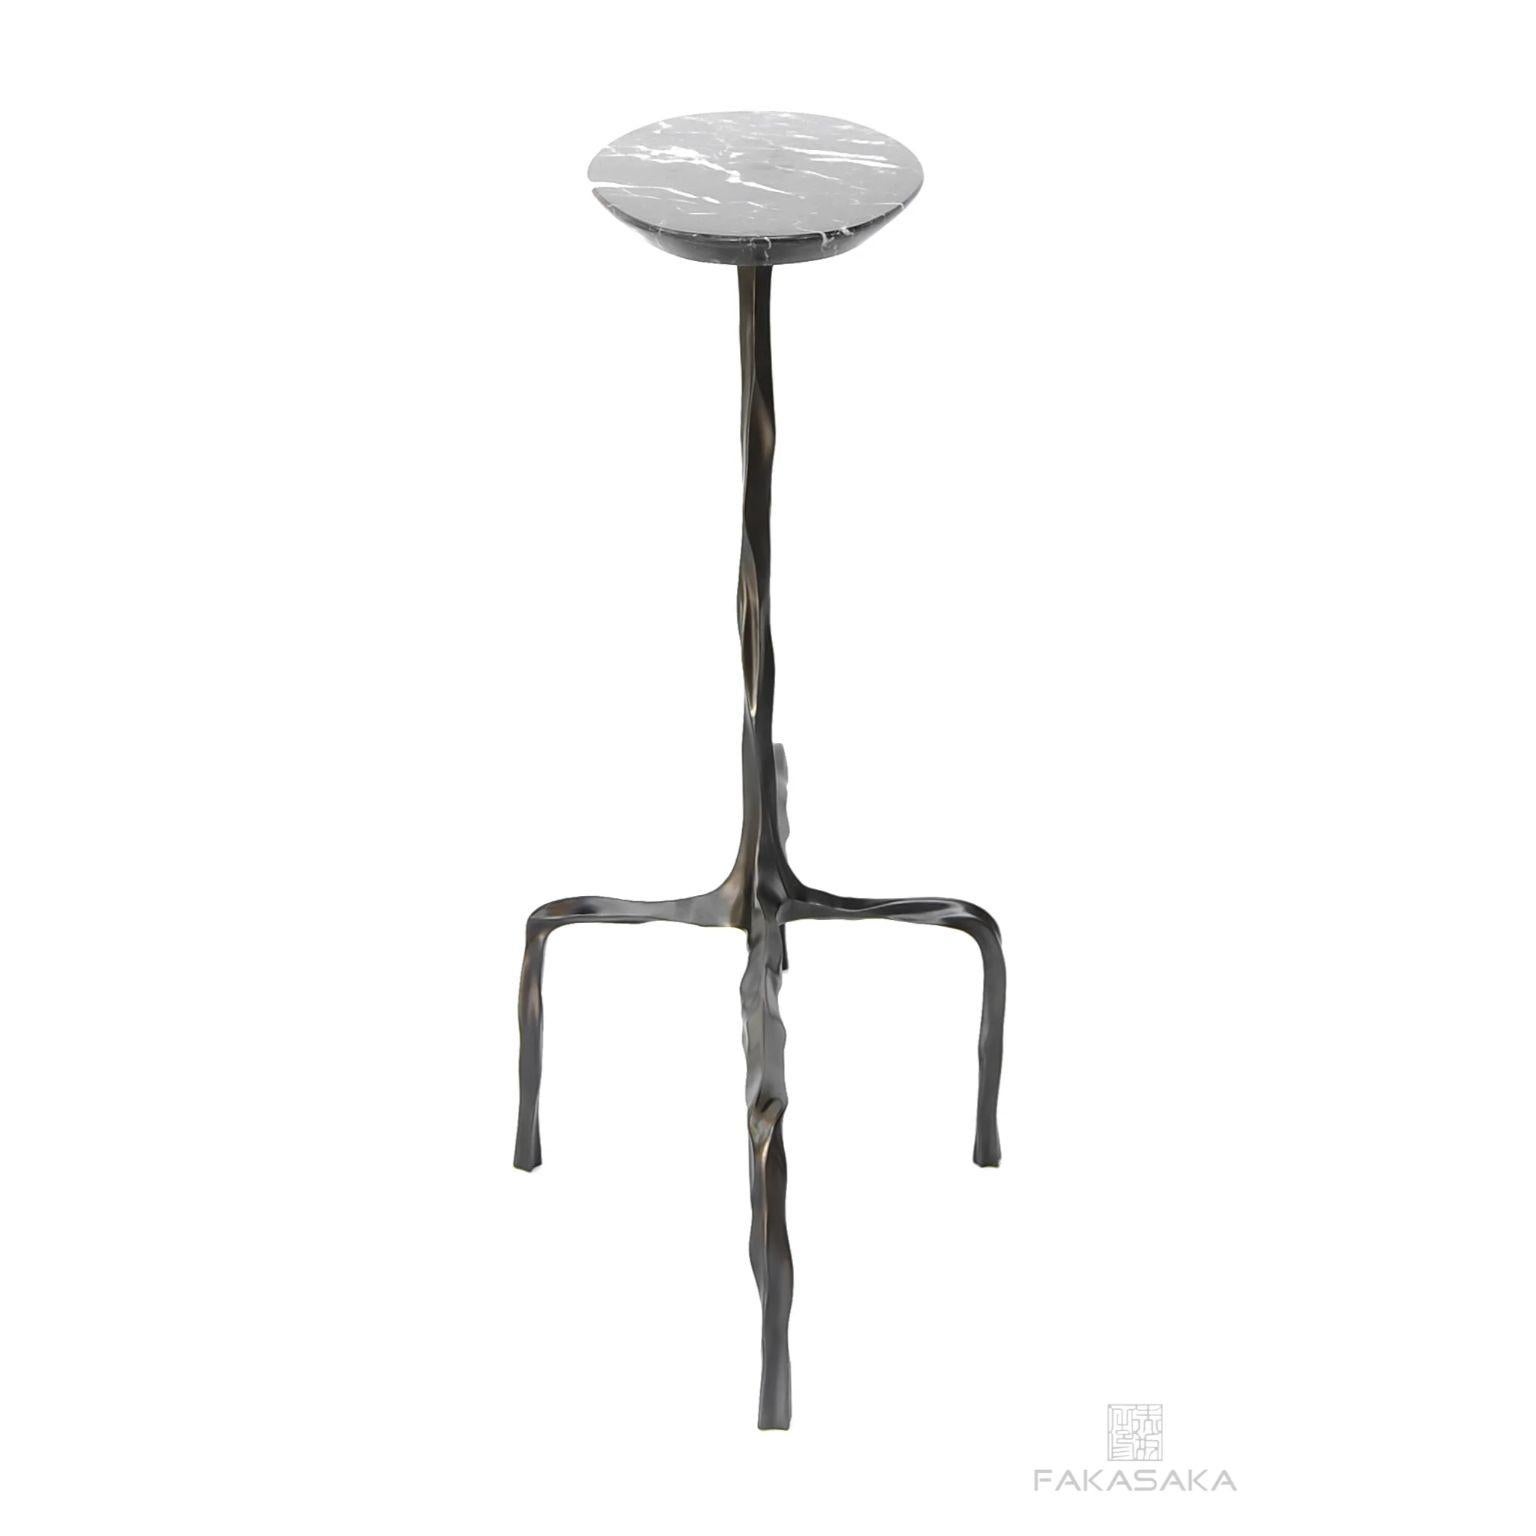 Brazilian Presley Drink Table with Nero Marquina Marble Top by Fakasaka Design For Sale